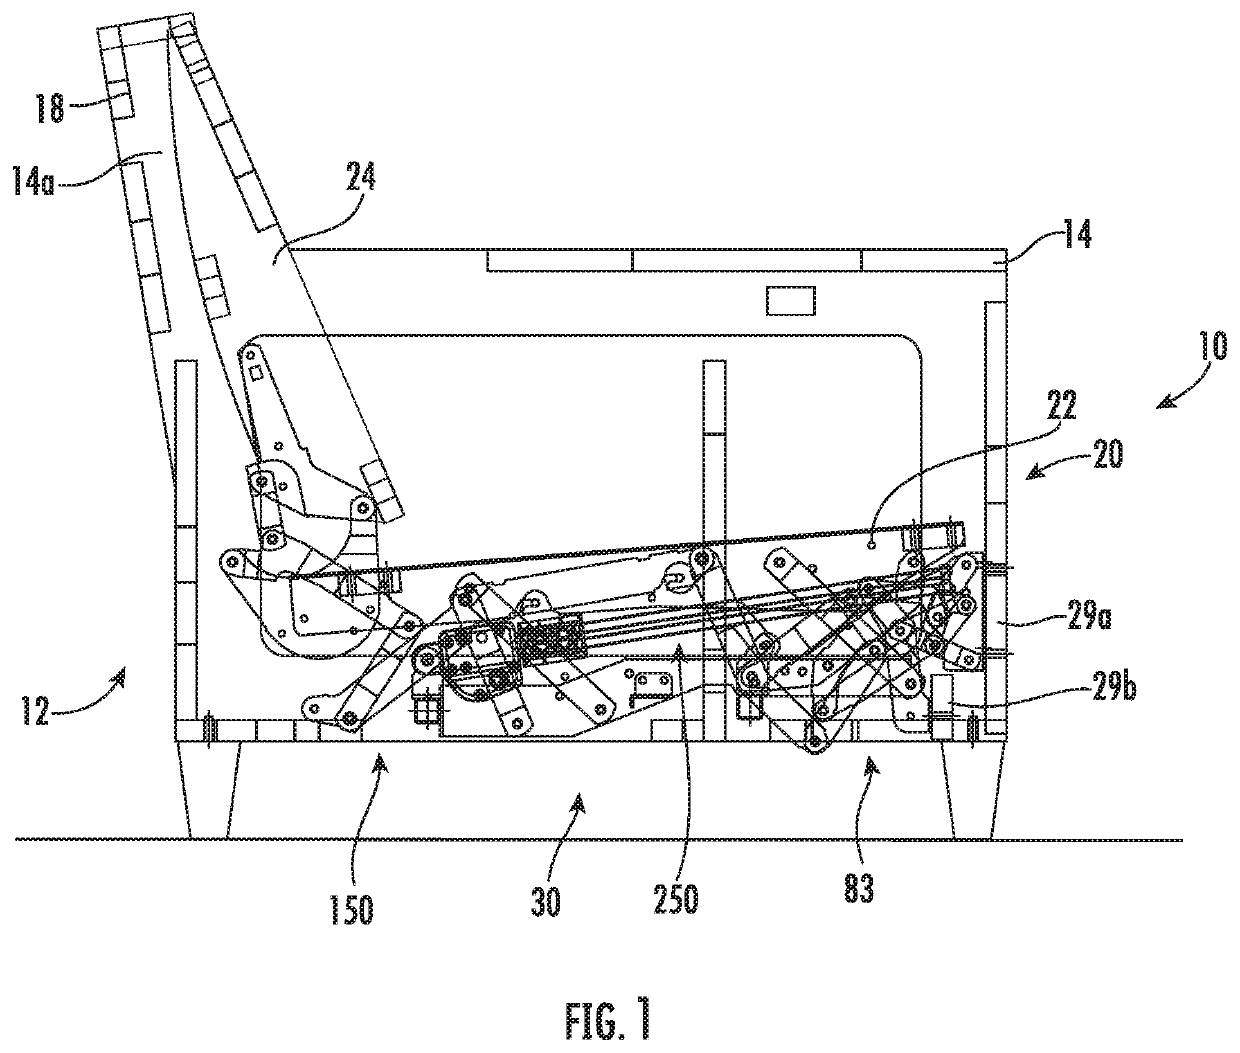 Reclining seating unit with wall-proximity capability